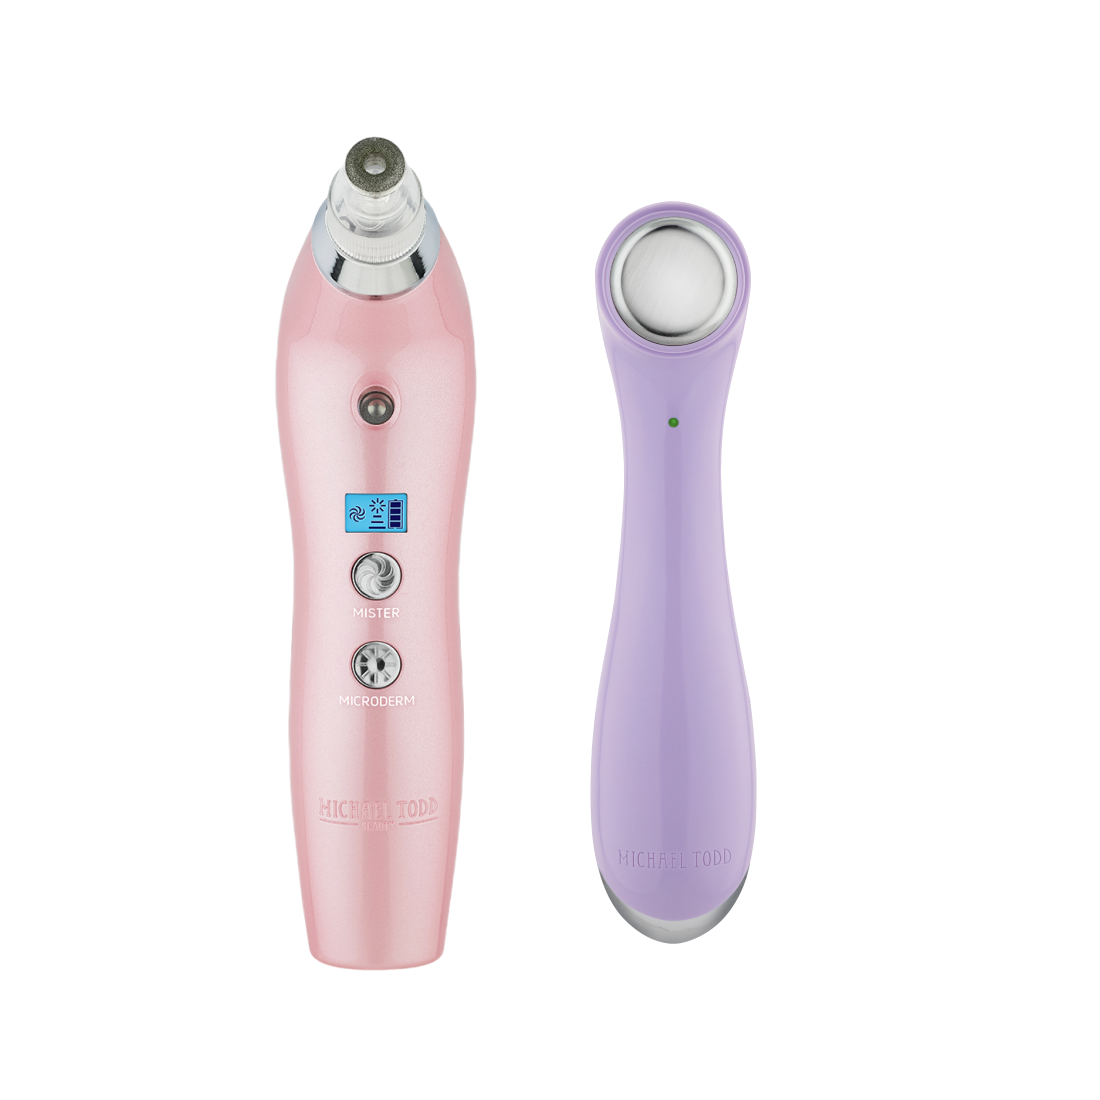 A pink Forever Young Bundle beauty device with silver buttons from Michael Todd Beauty.